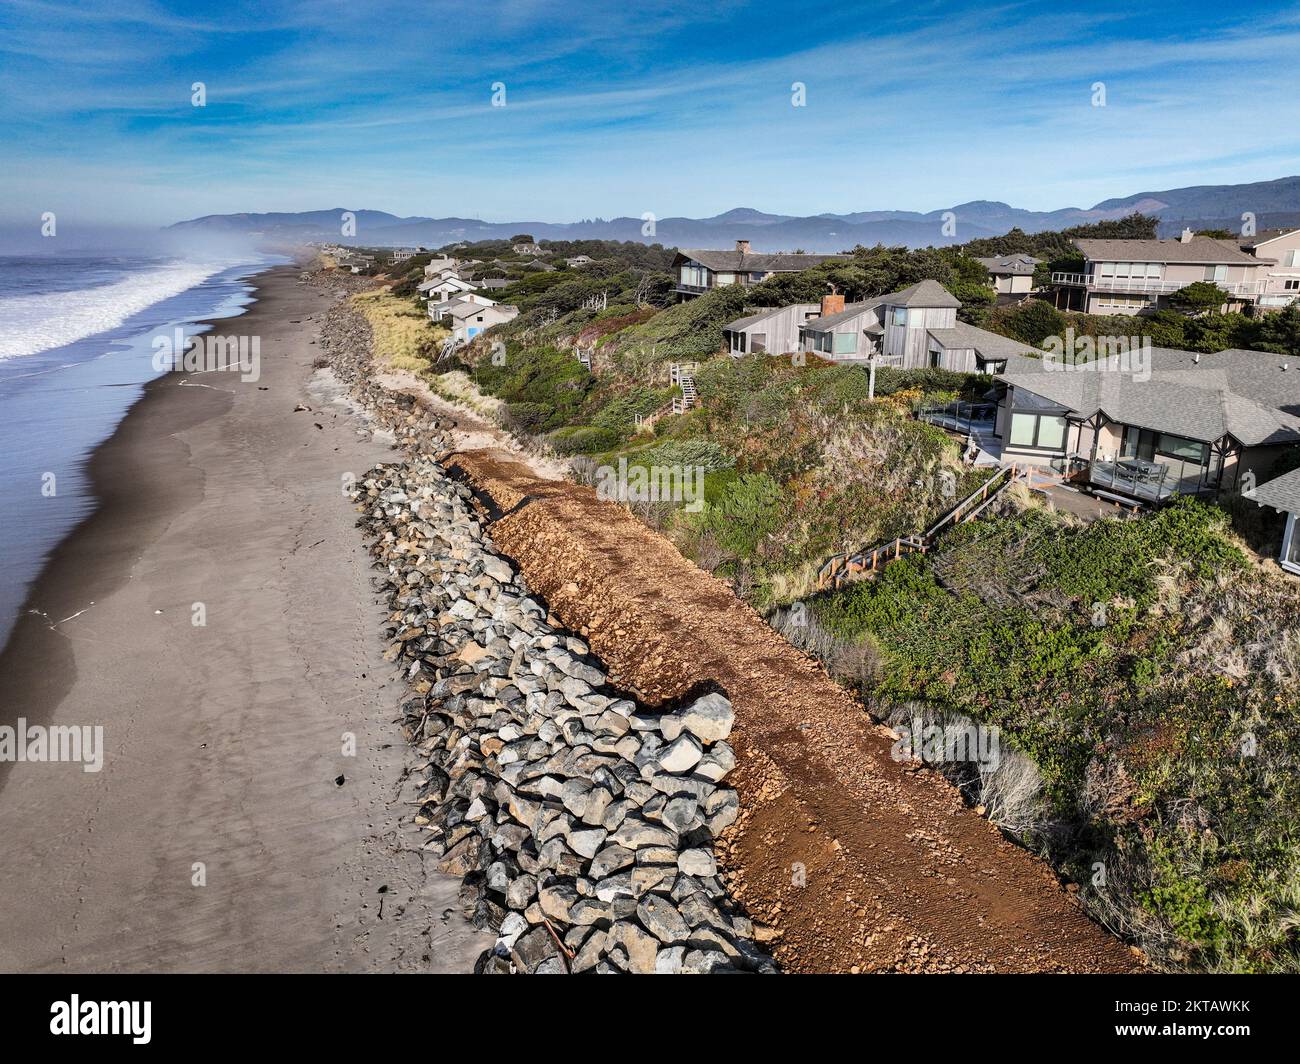 Communities along the Pacific Coast of the U.S. are attempting to combat sea level rise  by installing engineered riprap rock shoreline structures. Stock Photo